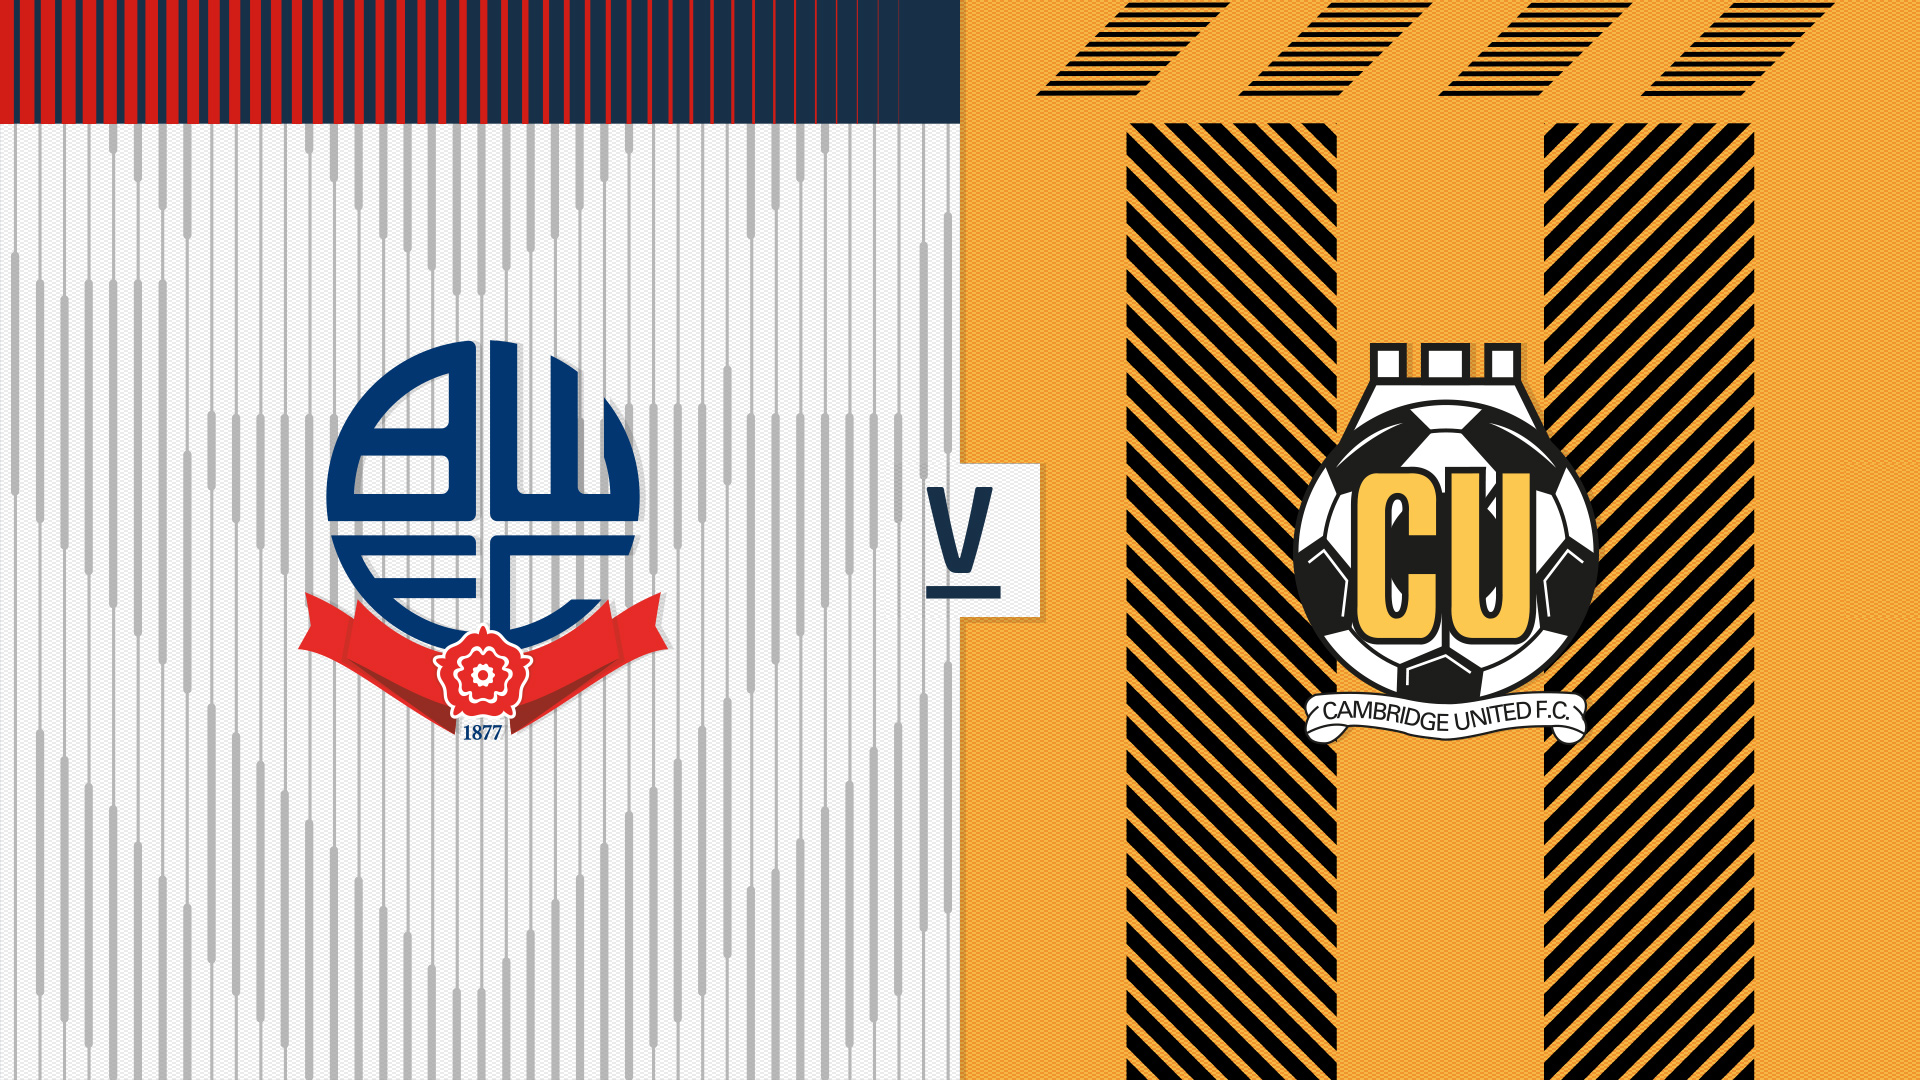 Bolton Wanderers v Cambridge United EFL League Two 09 March 2021 In Stock. 